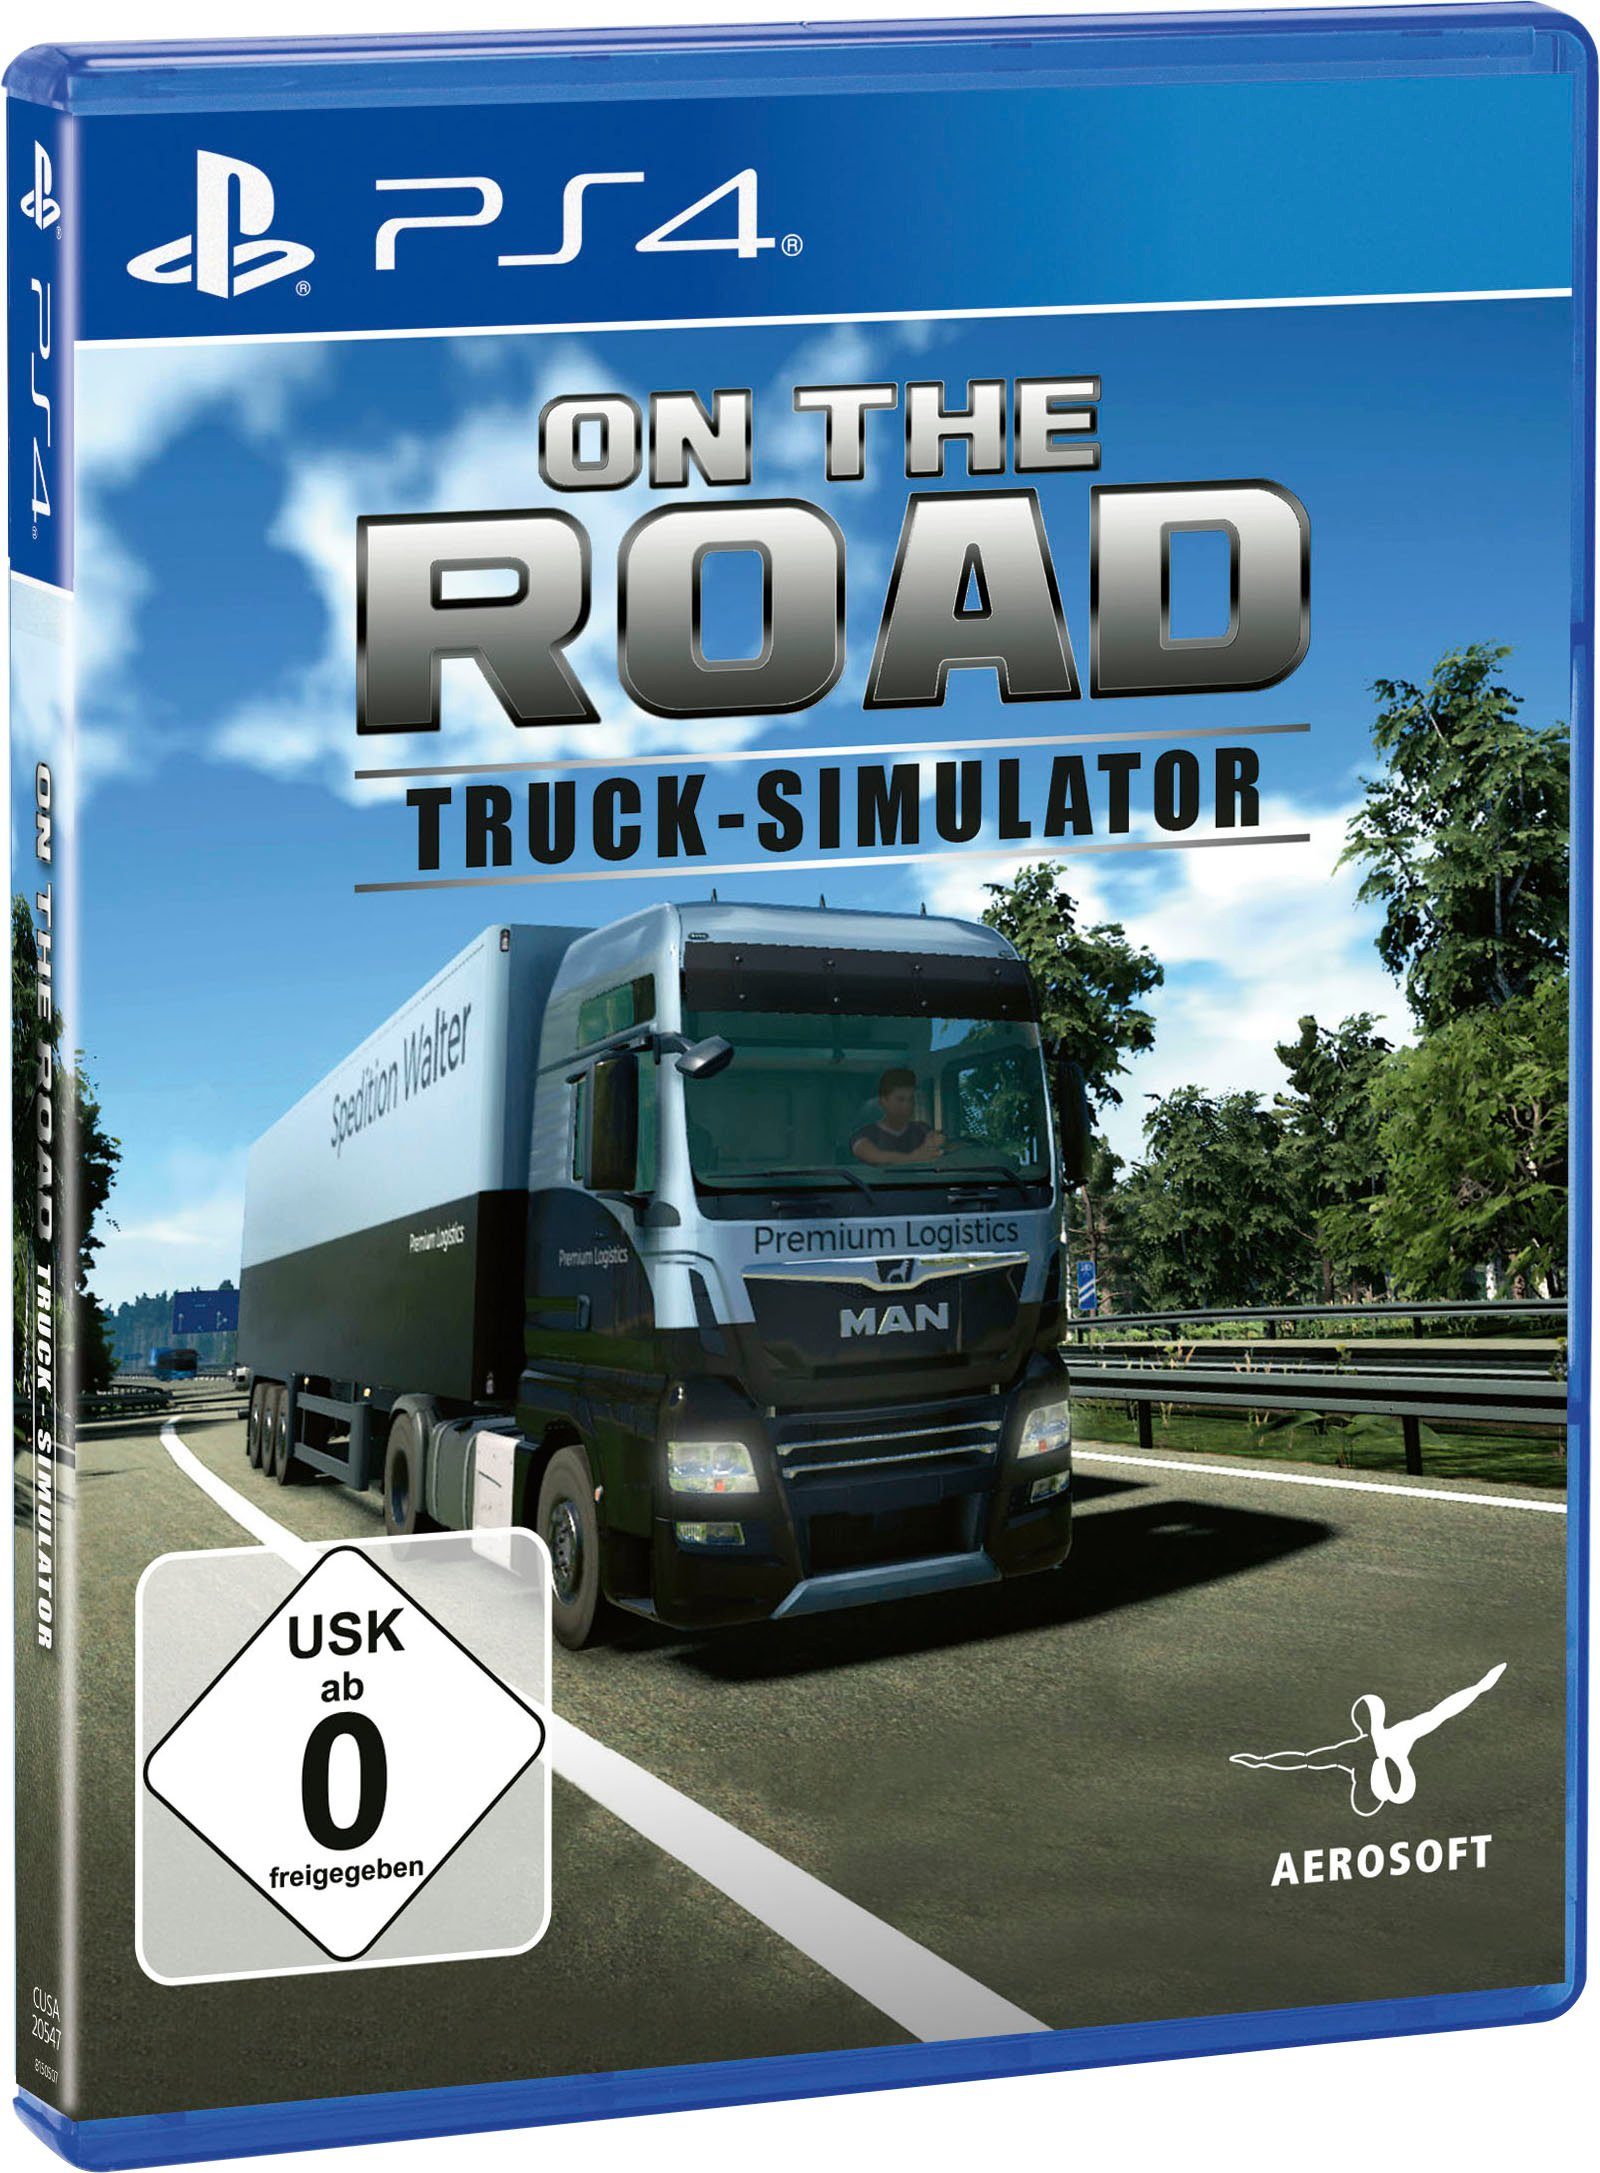 On Simulator the PlayStation 4 - Truck Road